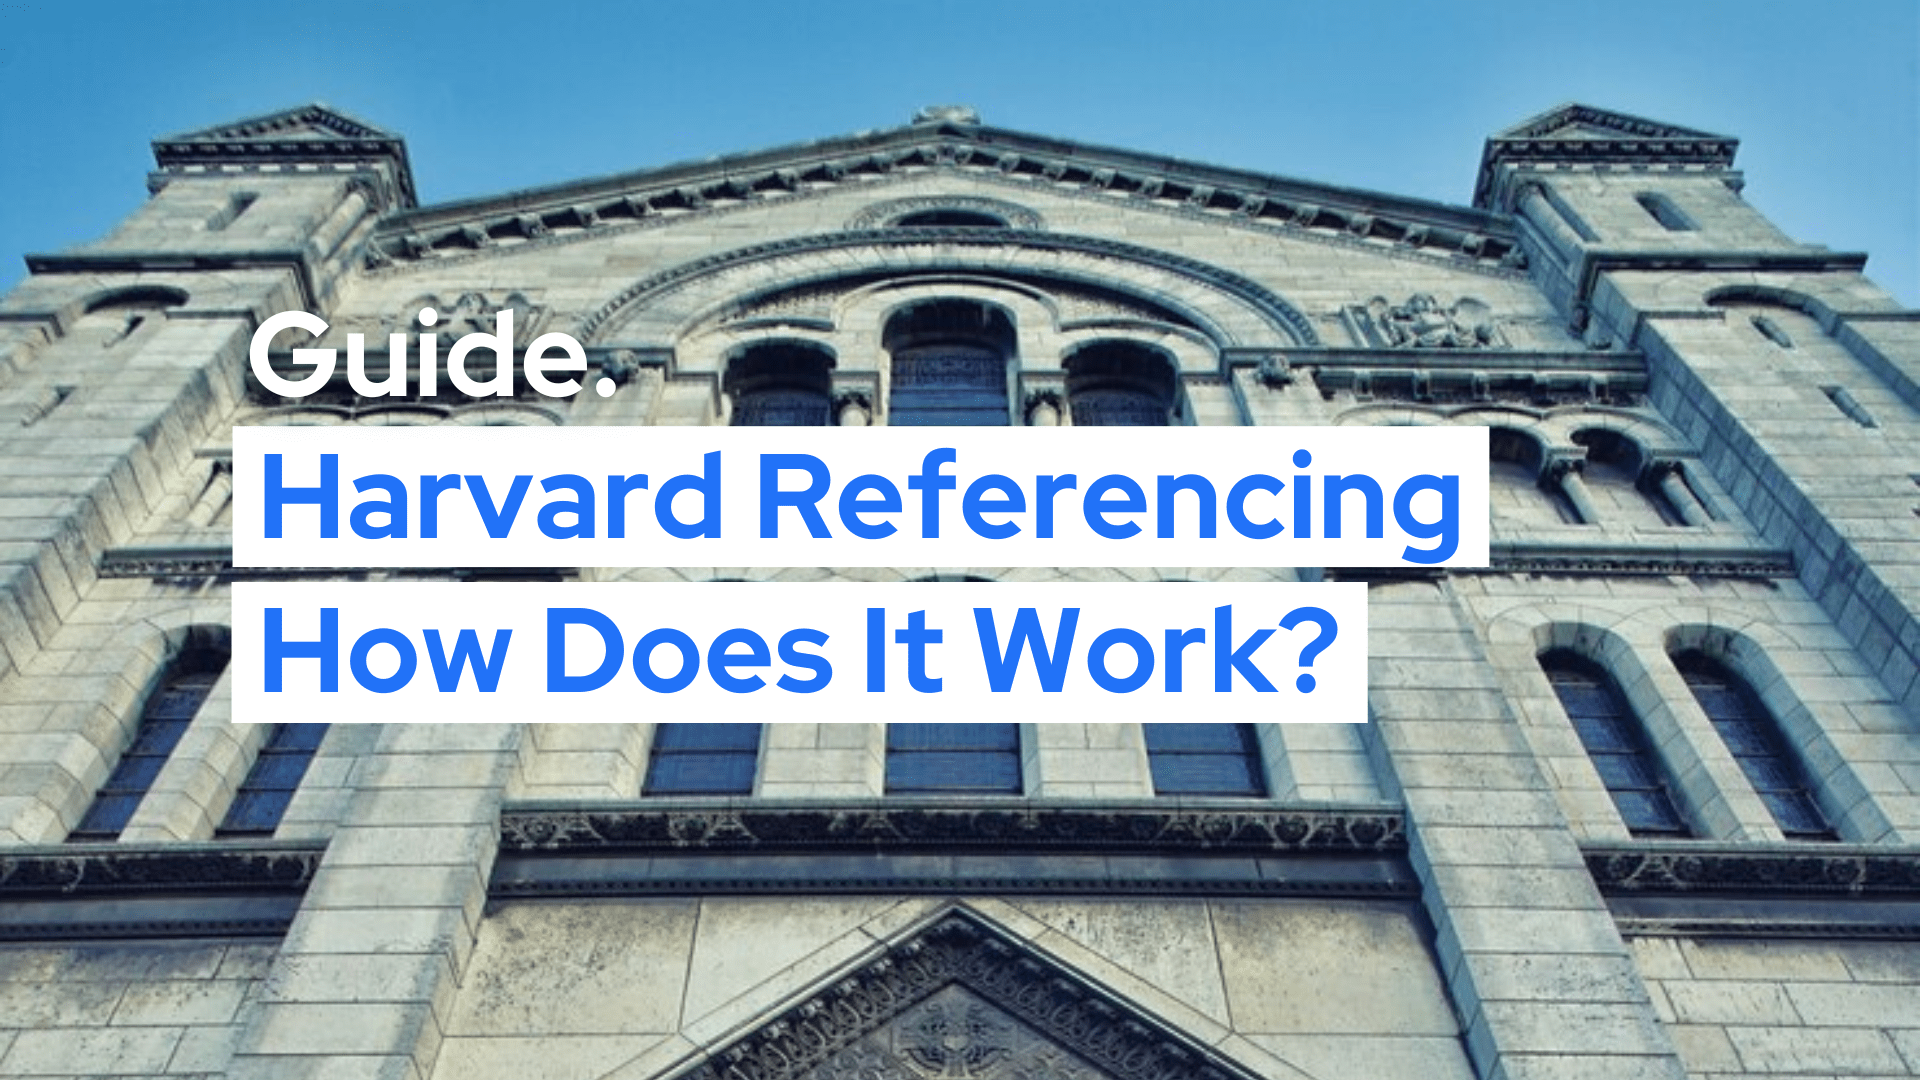 harvard business school. Text harvard referencing how does it work?. Guide